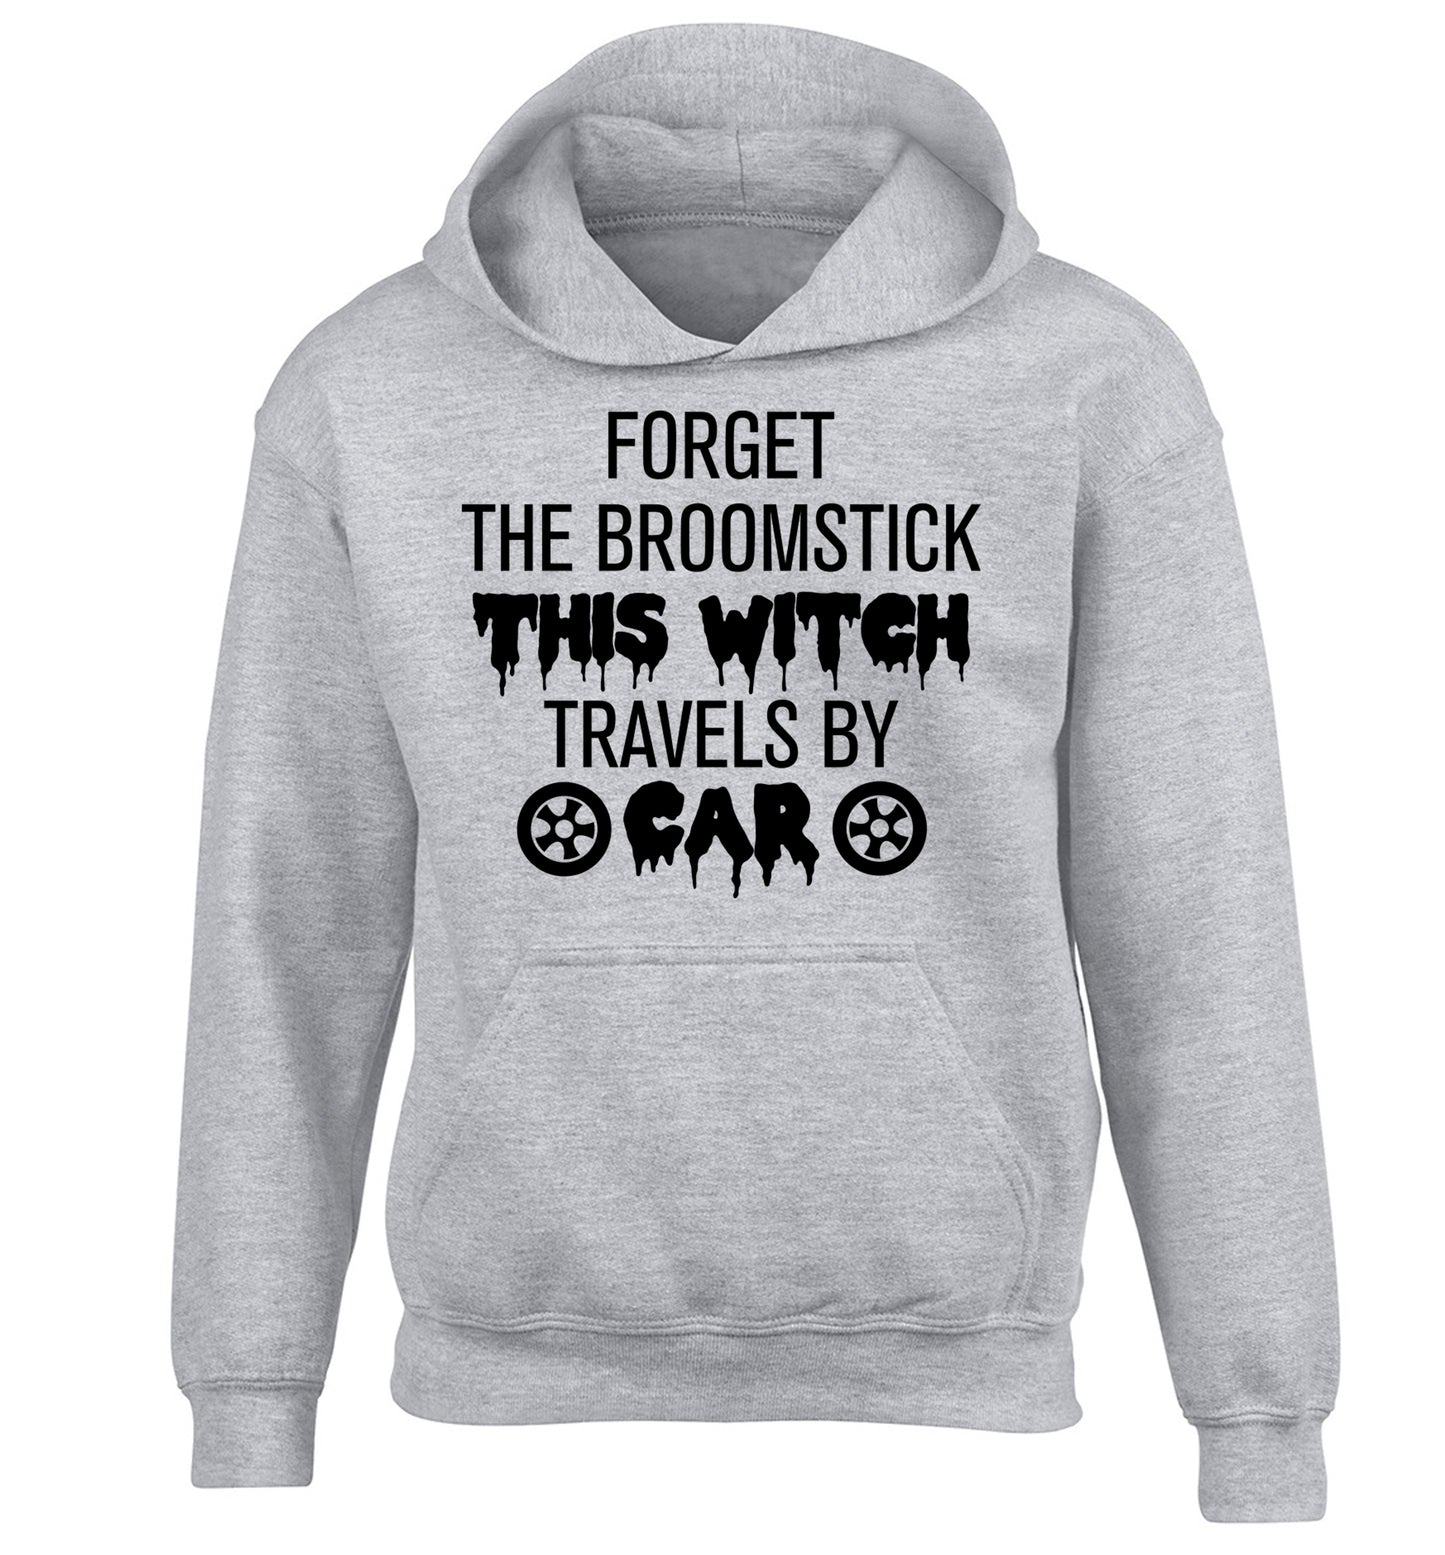 Forget the broomstick this witch travels by car children's grey hoodie 12-14 Years